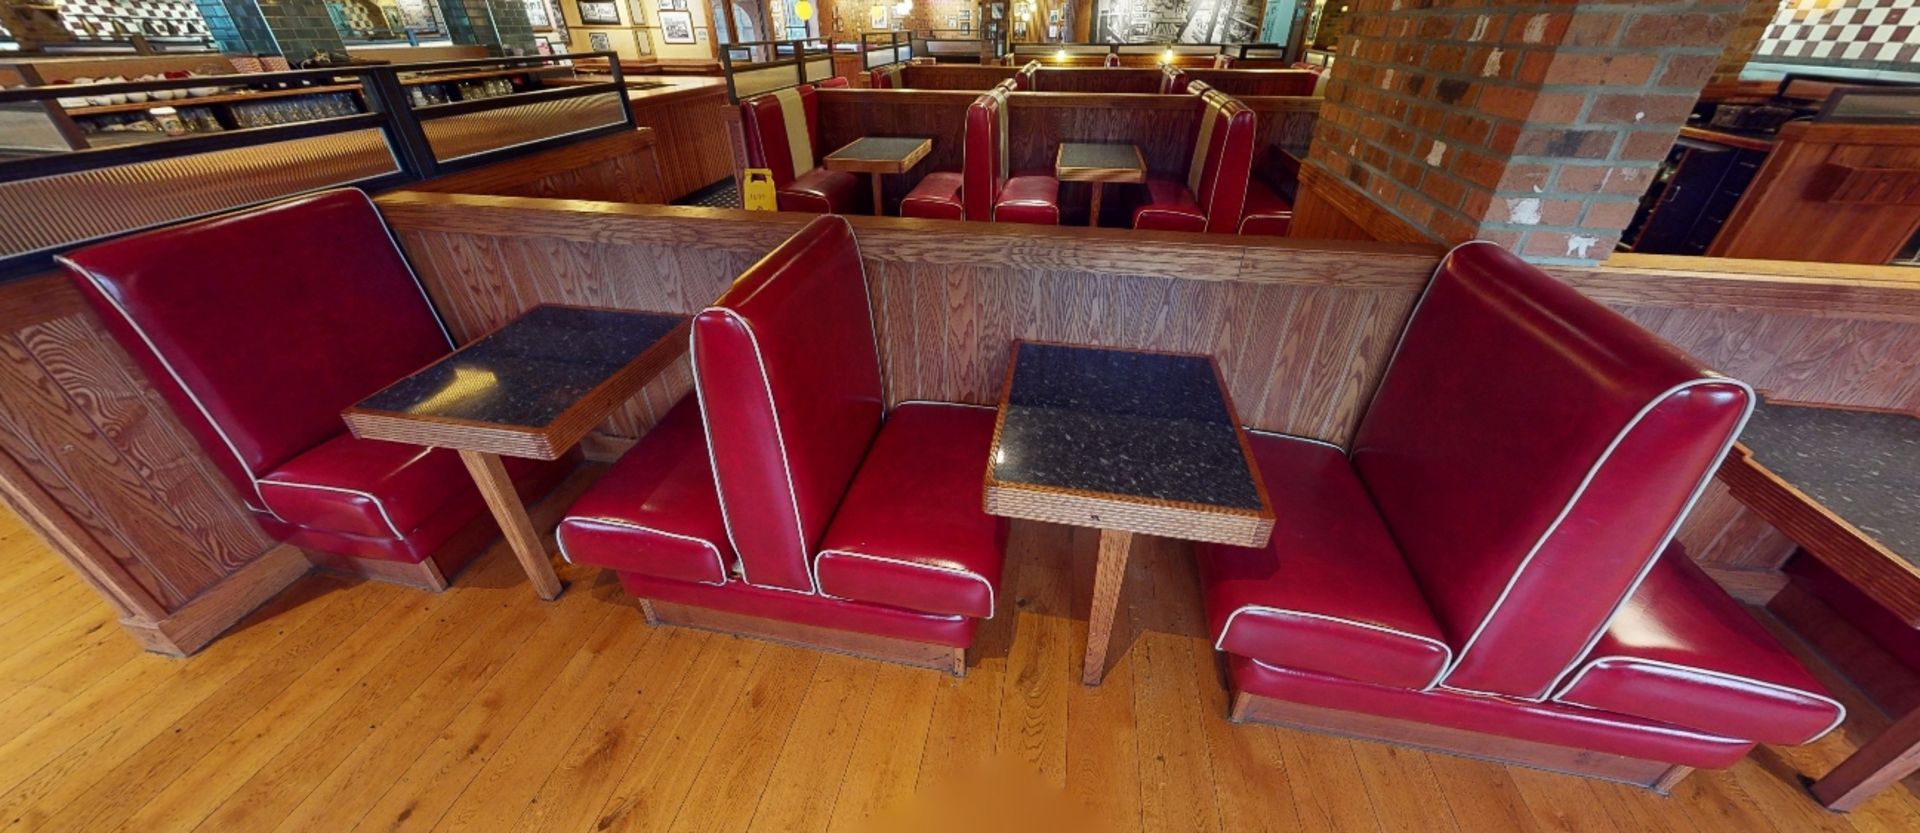 Selection of Single Seating Benches and Dining Tables to Seat Upto 10 Persons - Retro - 1950's - Image 2 of 6